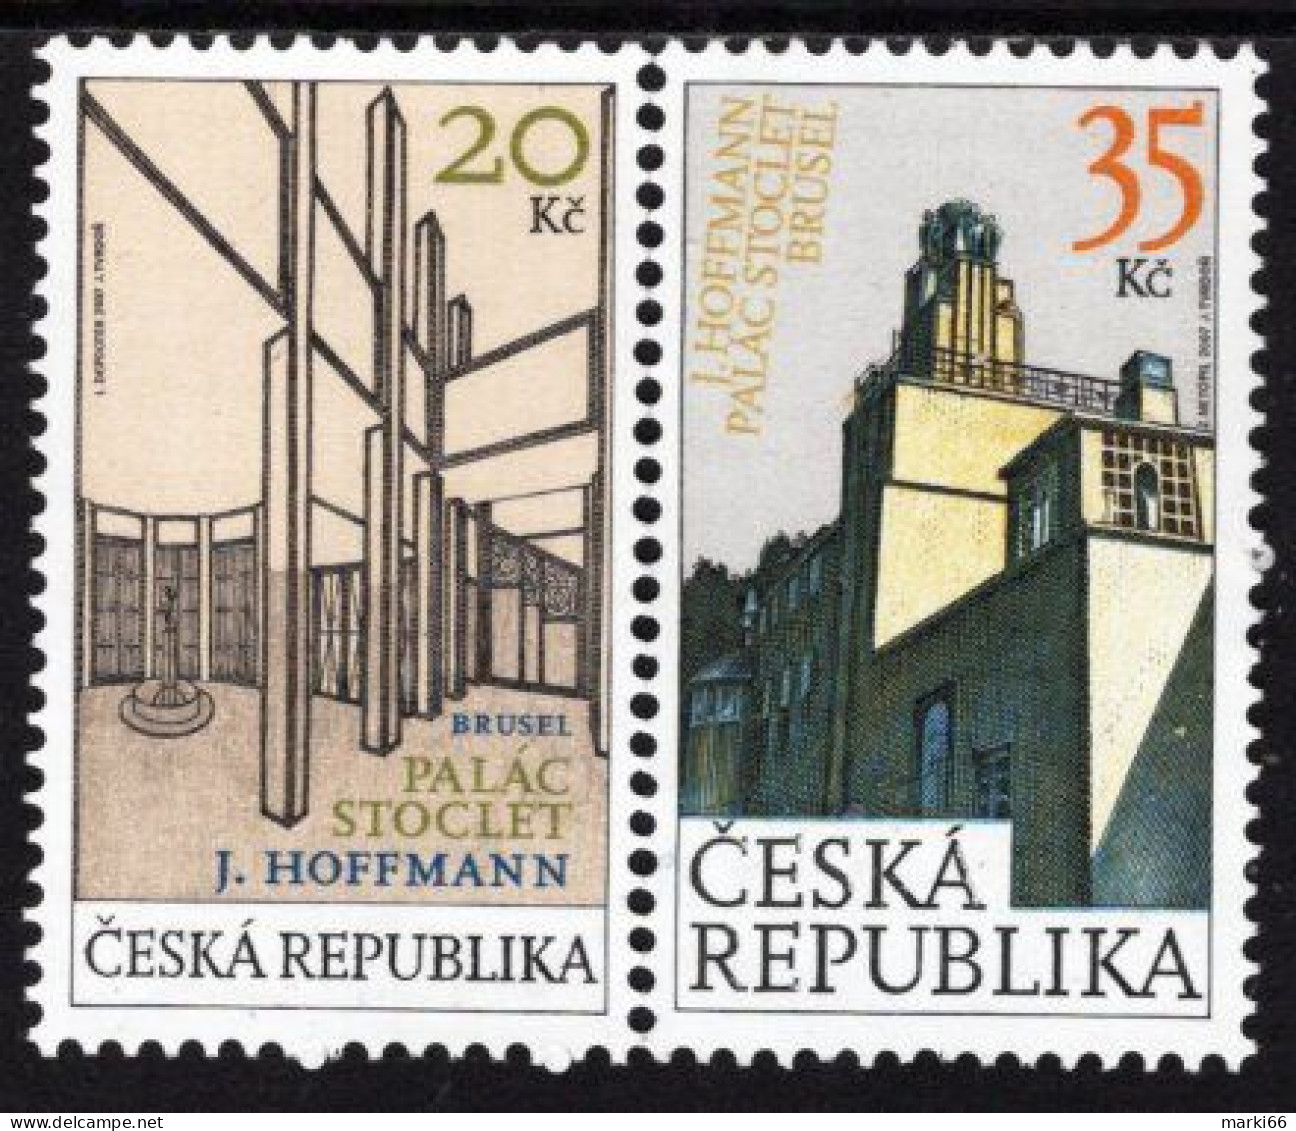 Czech Republic - 2007 - Architecture - Stoclet Palace - Joint Issue With Belgium - Mint Stamp Set - Nuovi